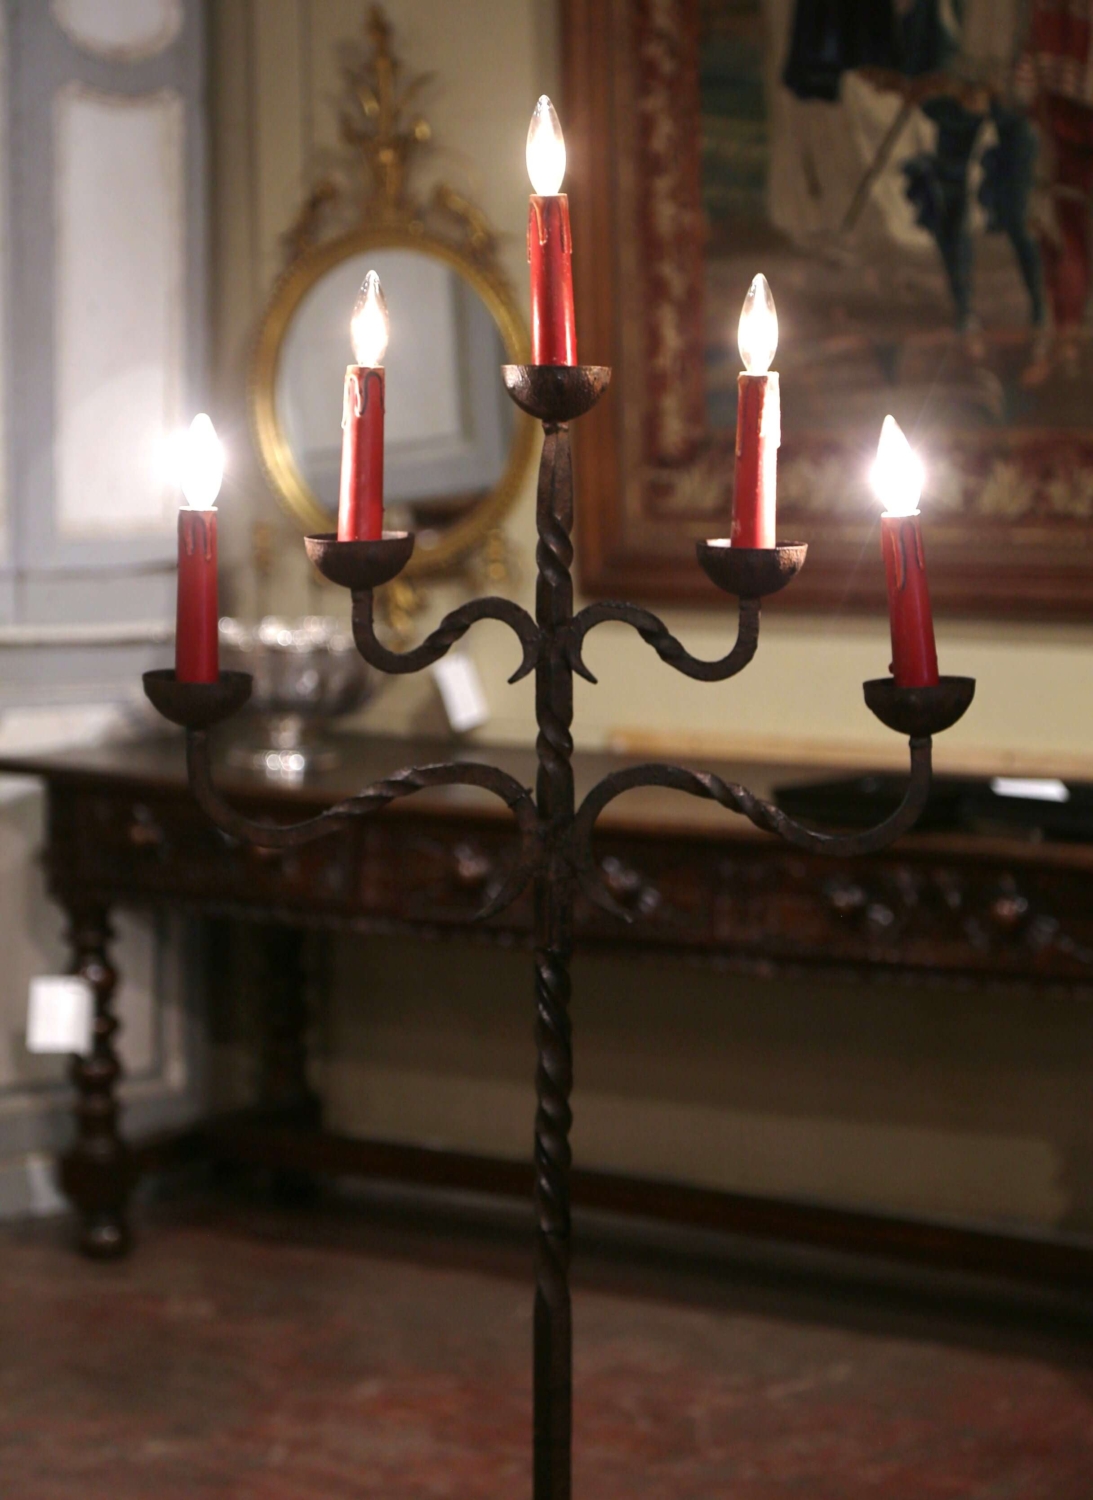 Hand-Forged Metal Candelabra with Antique Finish - Northlight Interiors,  Inc.